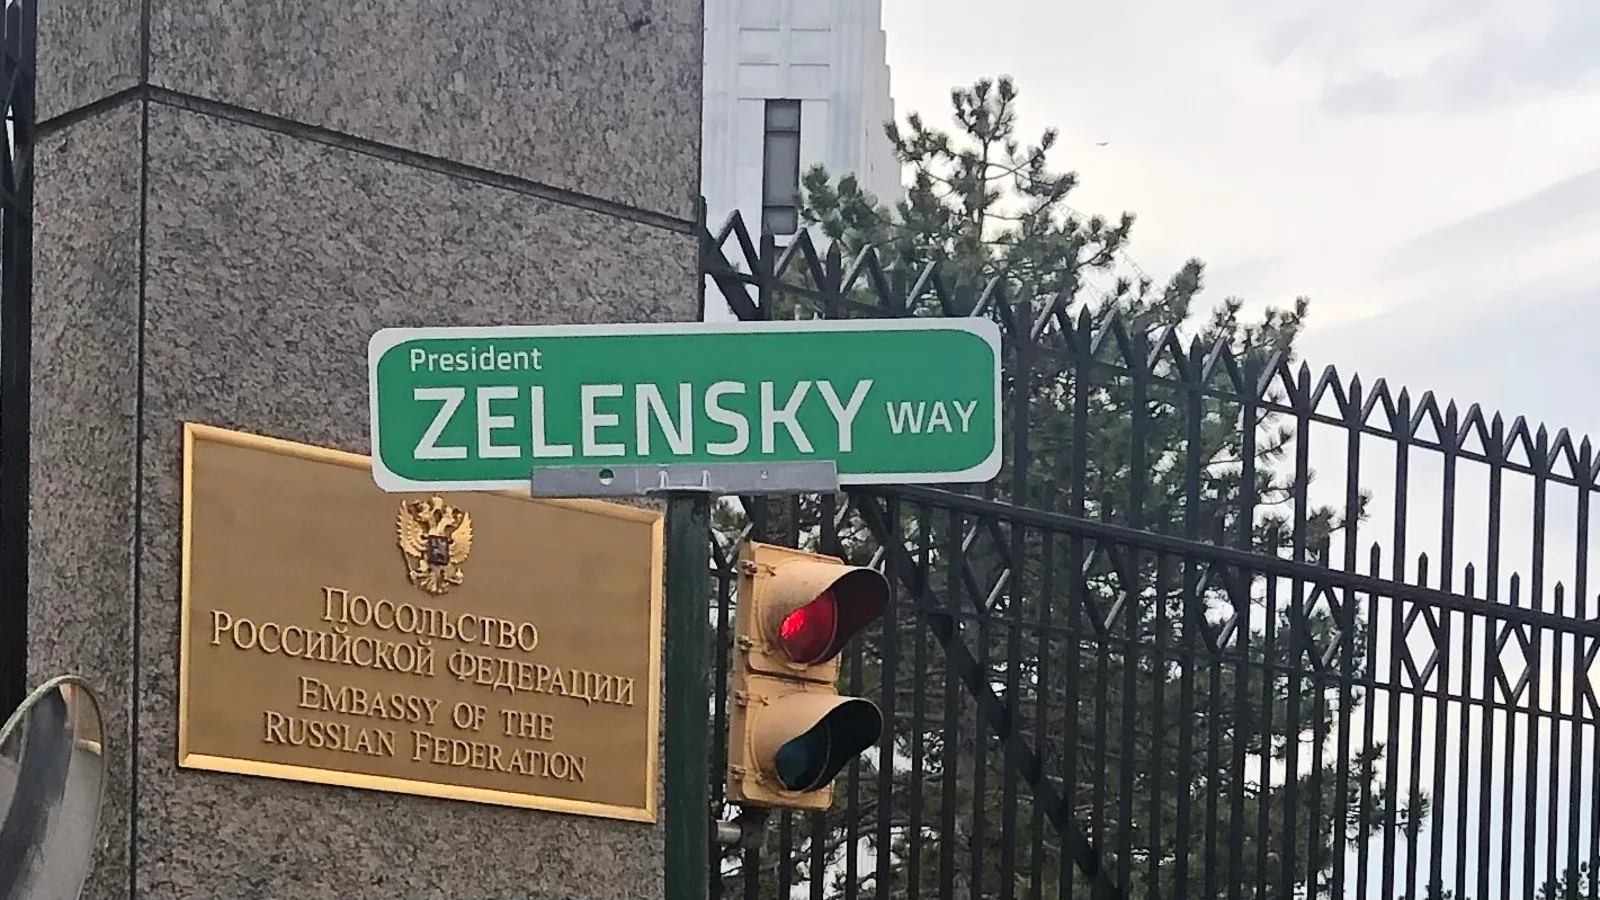 Is there a road named President Zelensky way in Washington? Photo goes viral